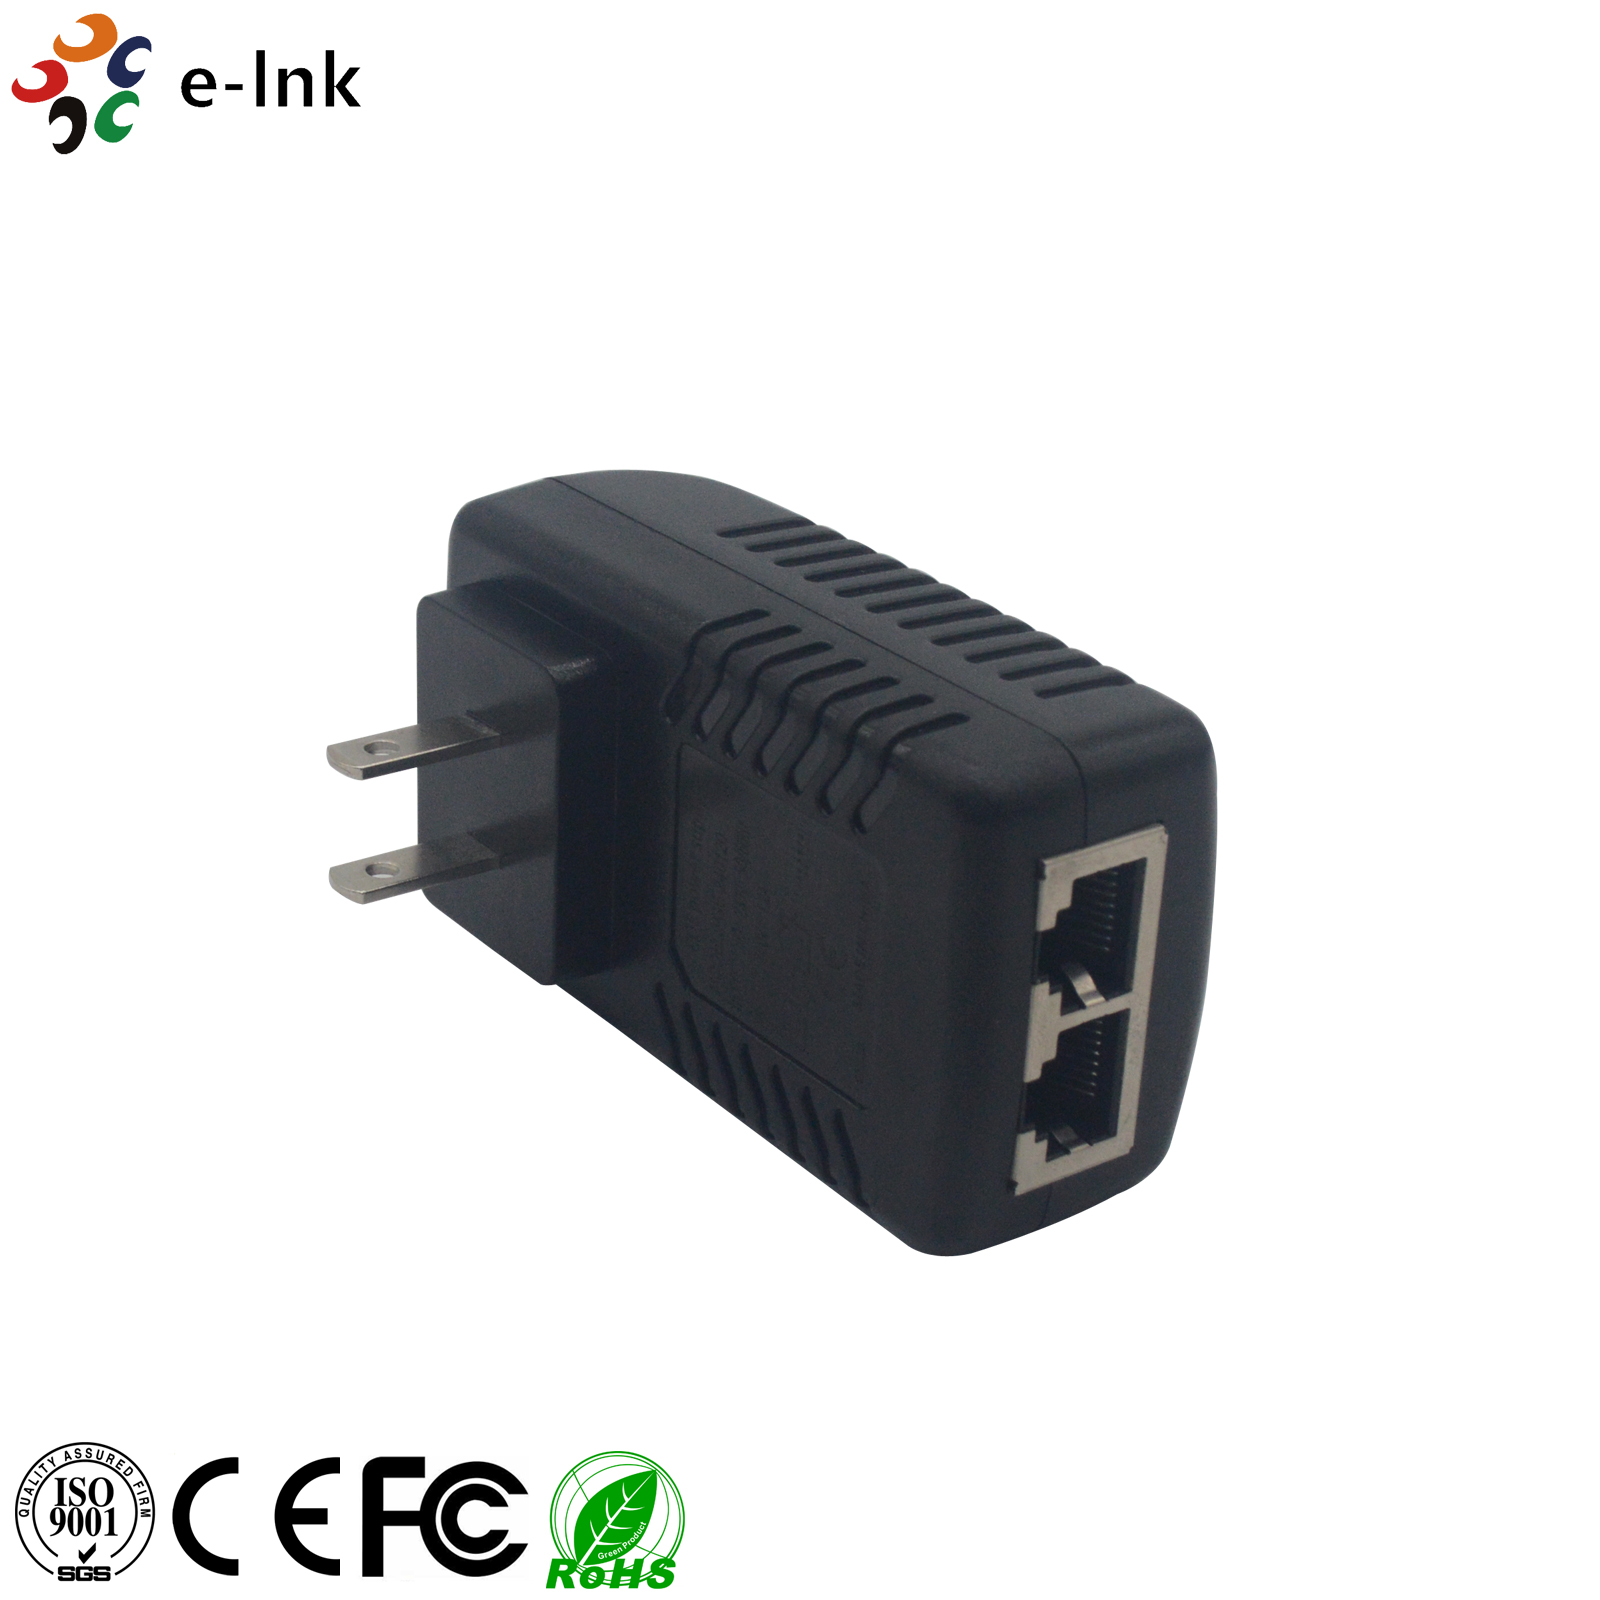 12VDC@1.5A 18W POE Adapter Injector